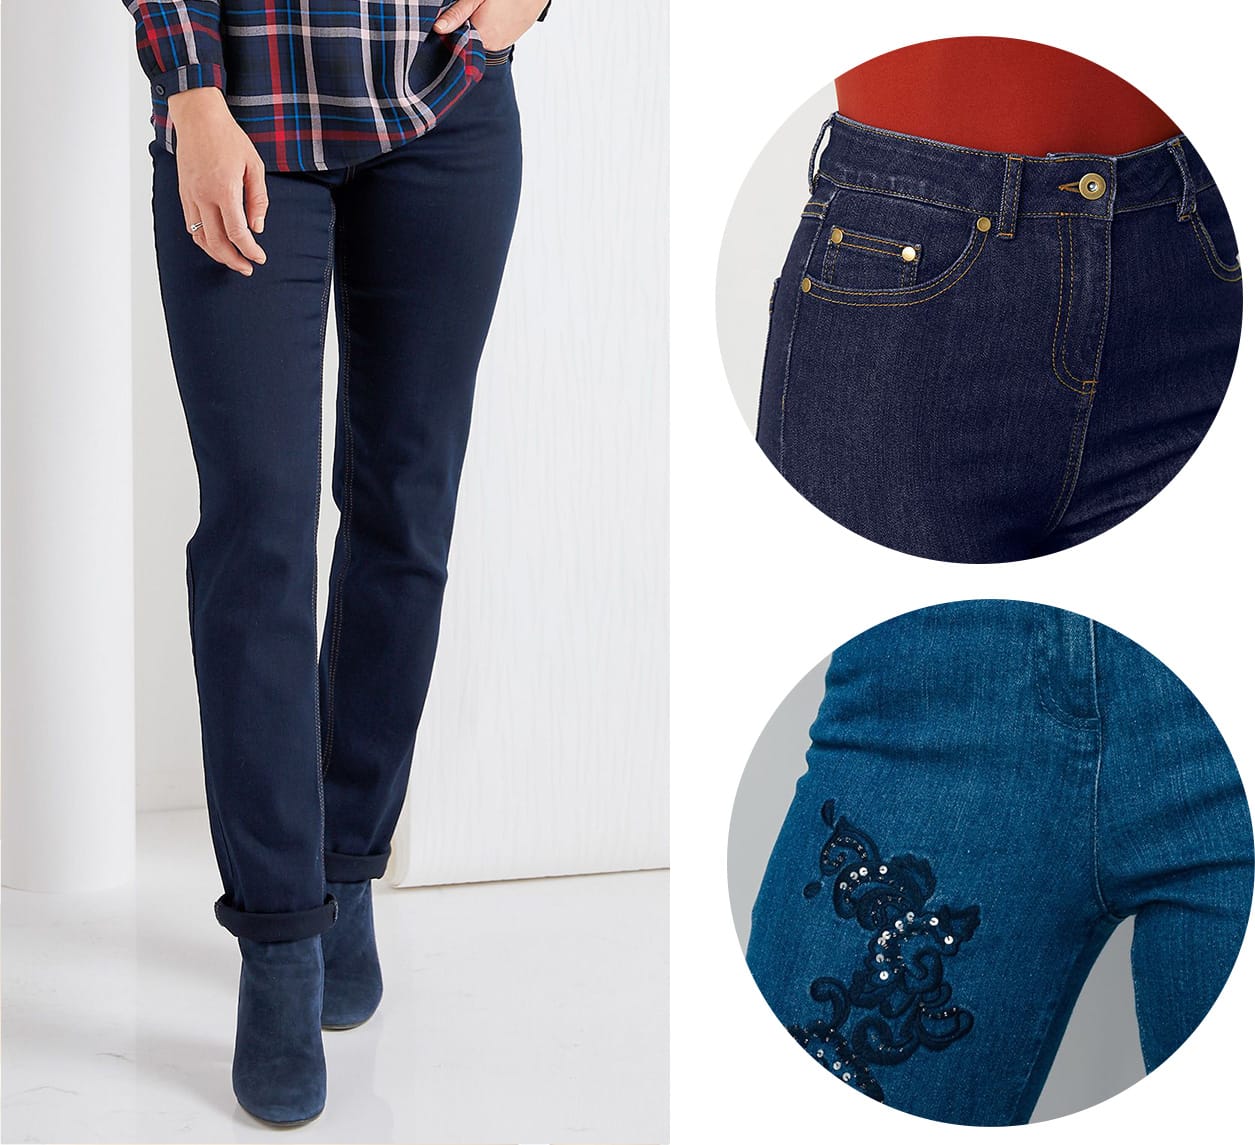 All jeans and denim trousers